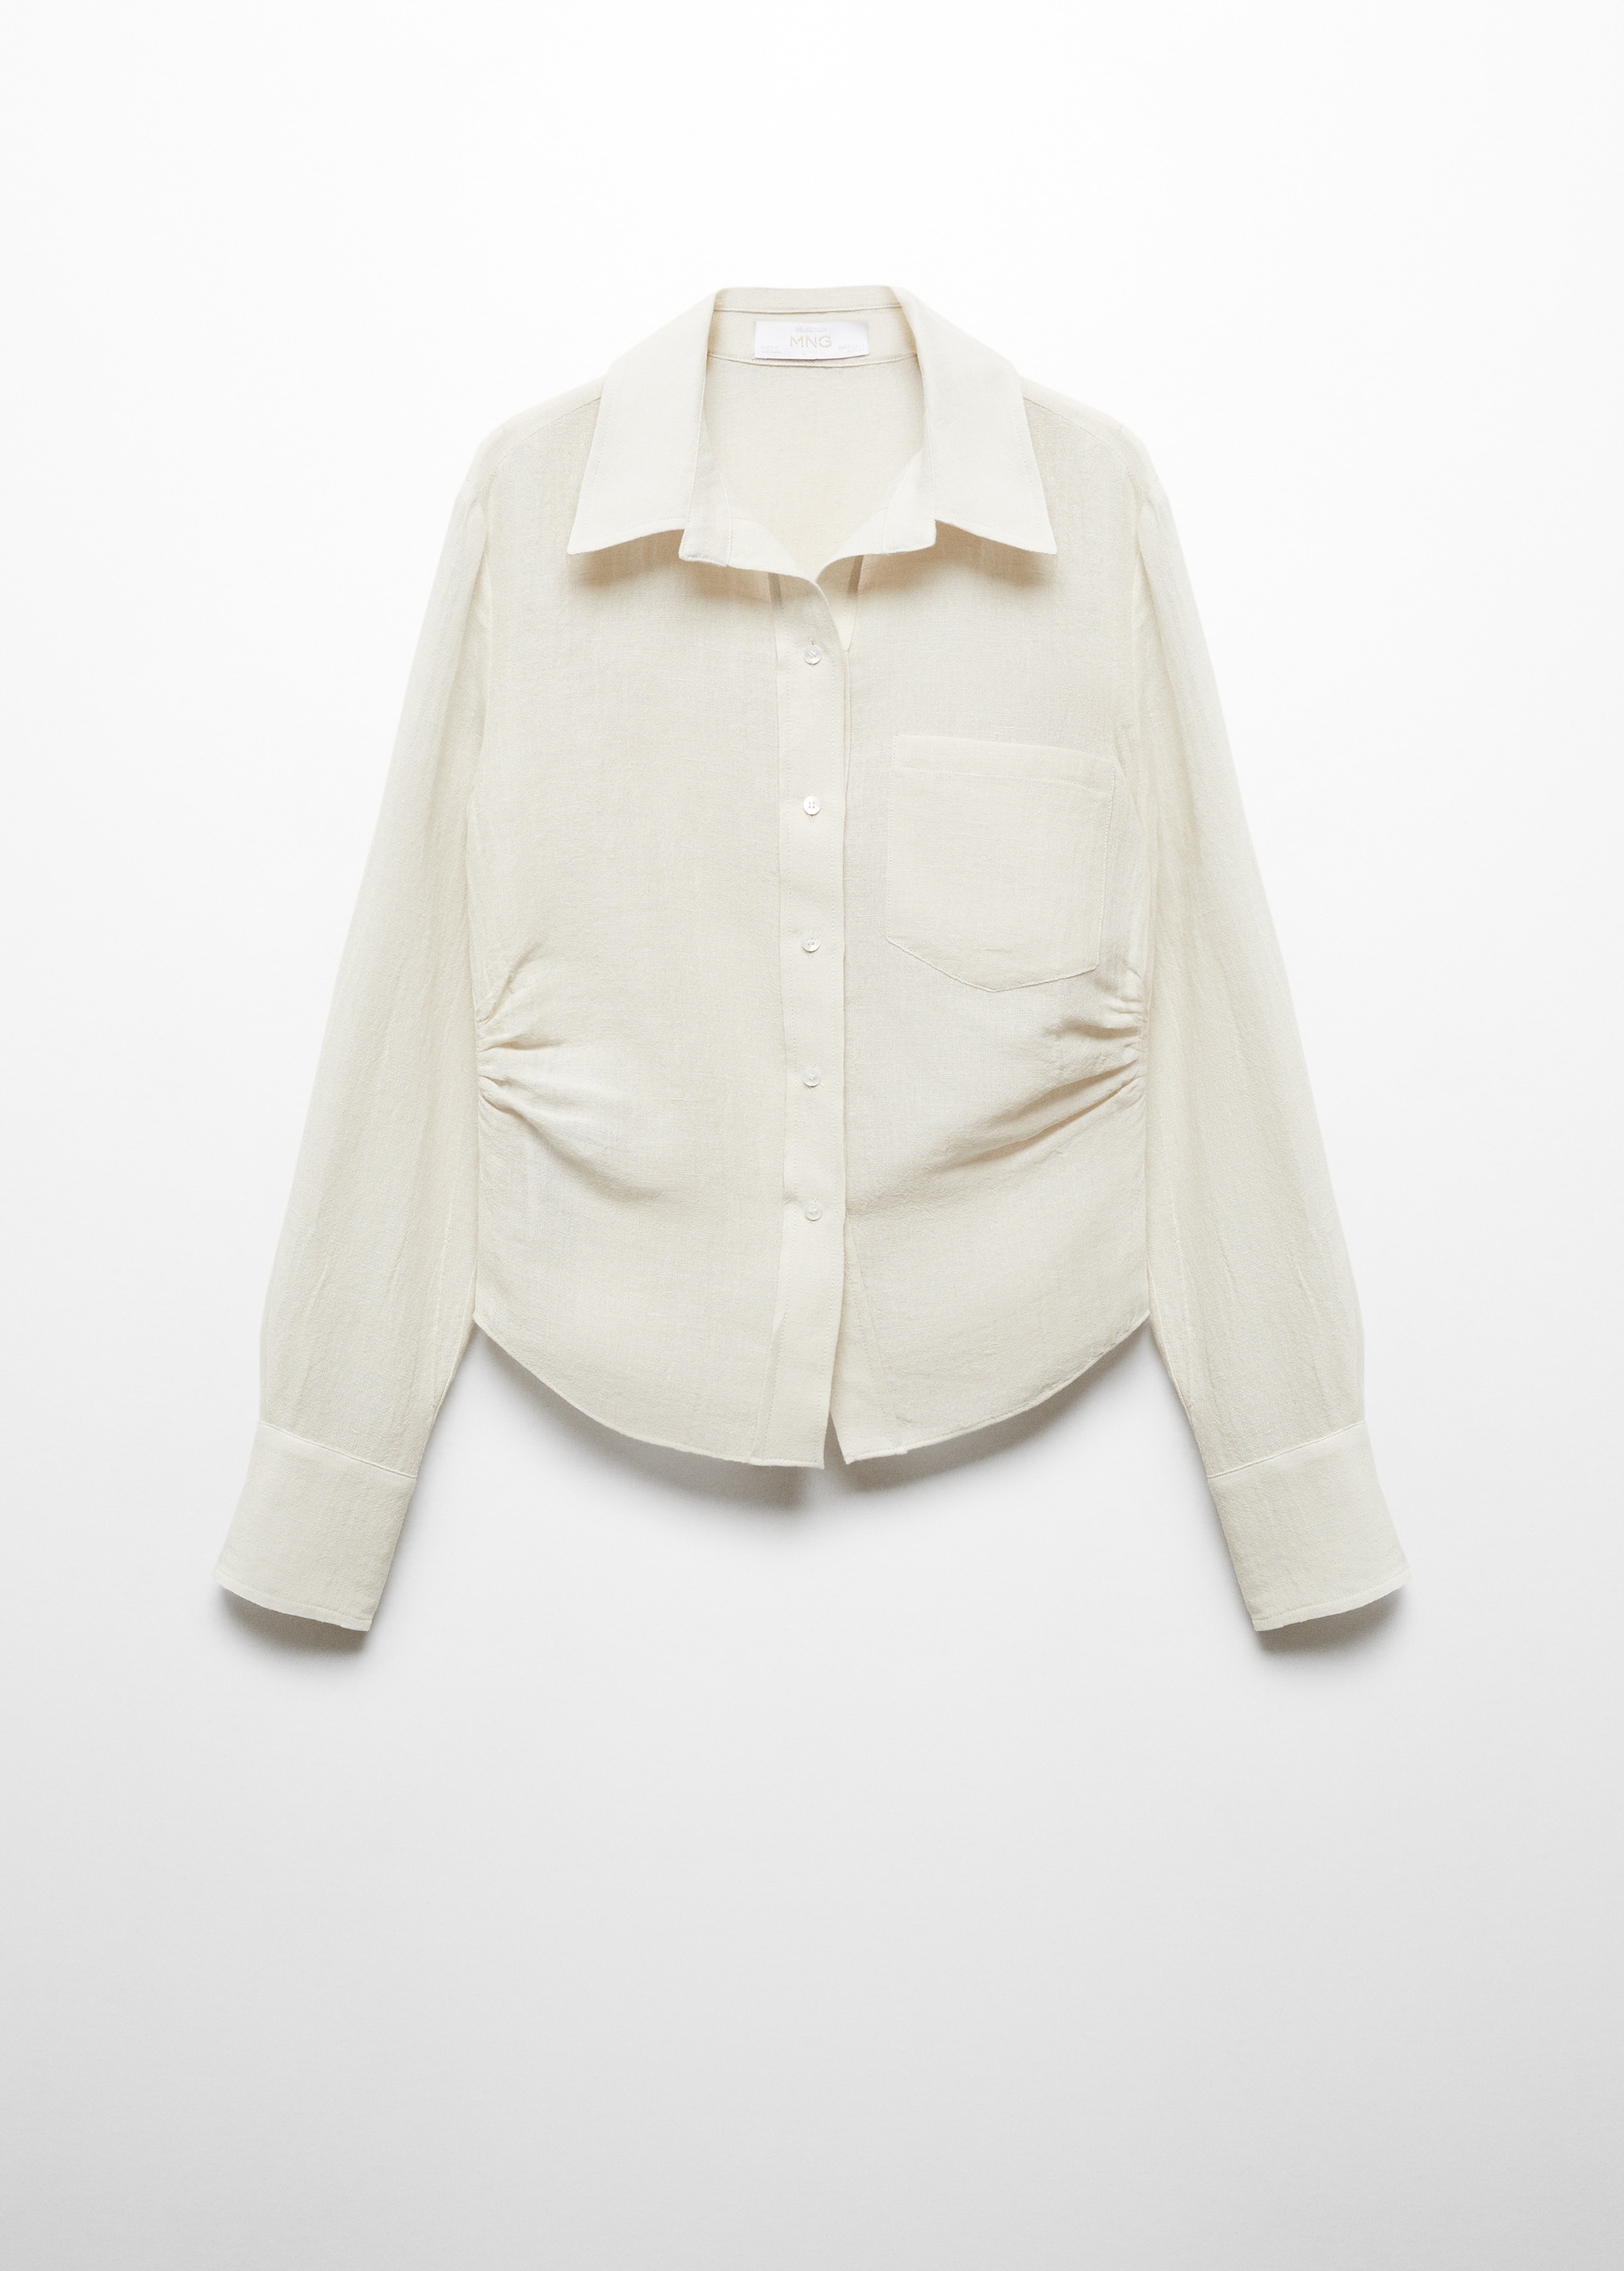 Linen shirt with draped detail - Article without model